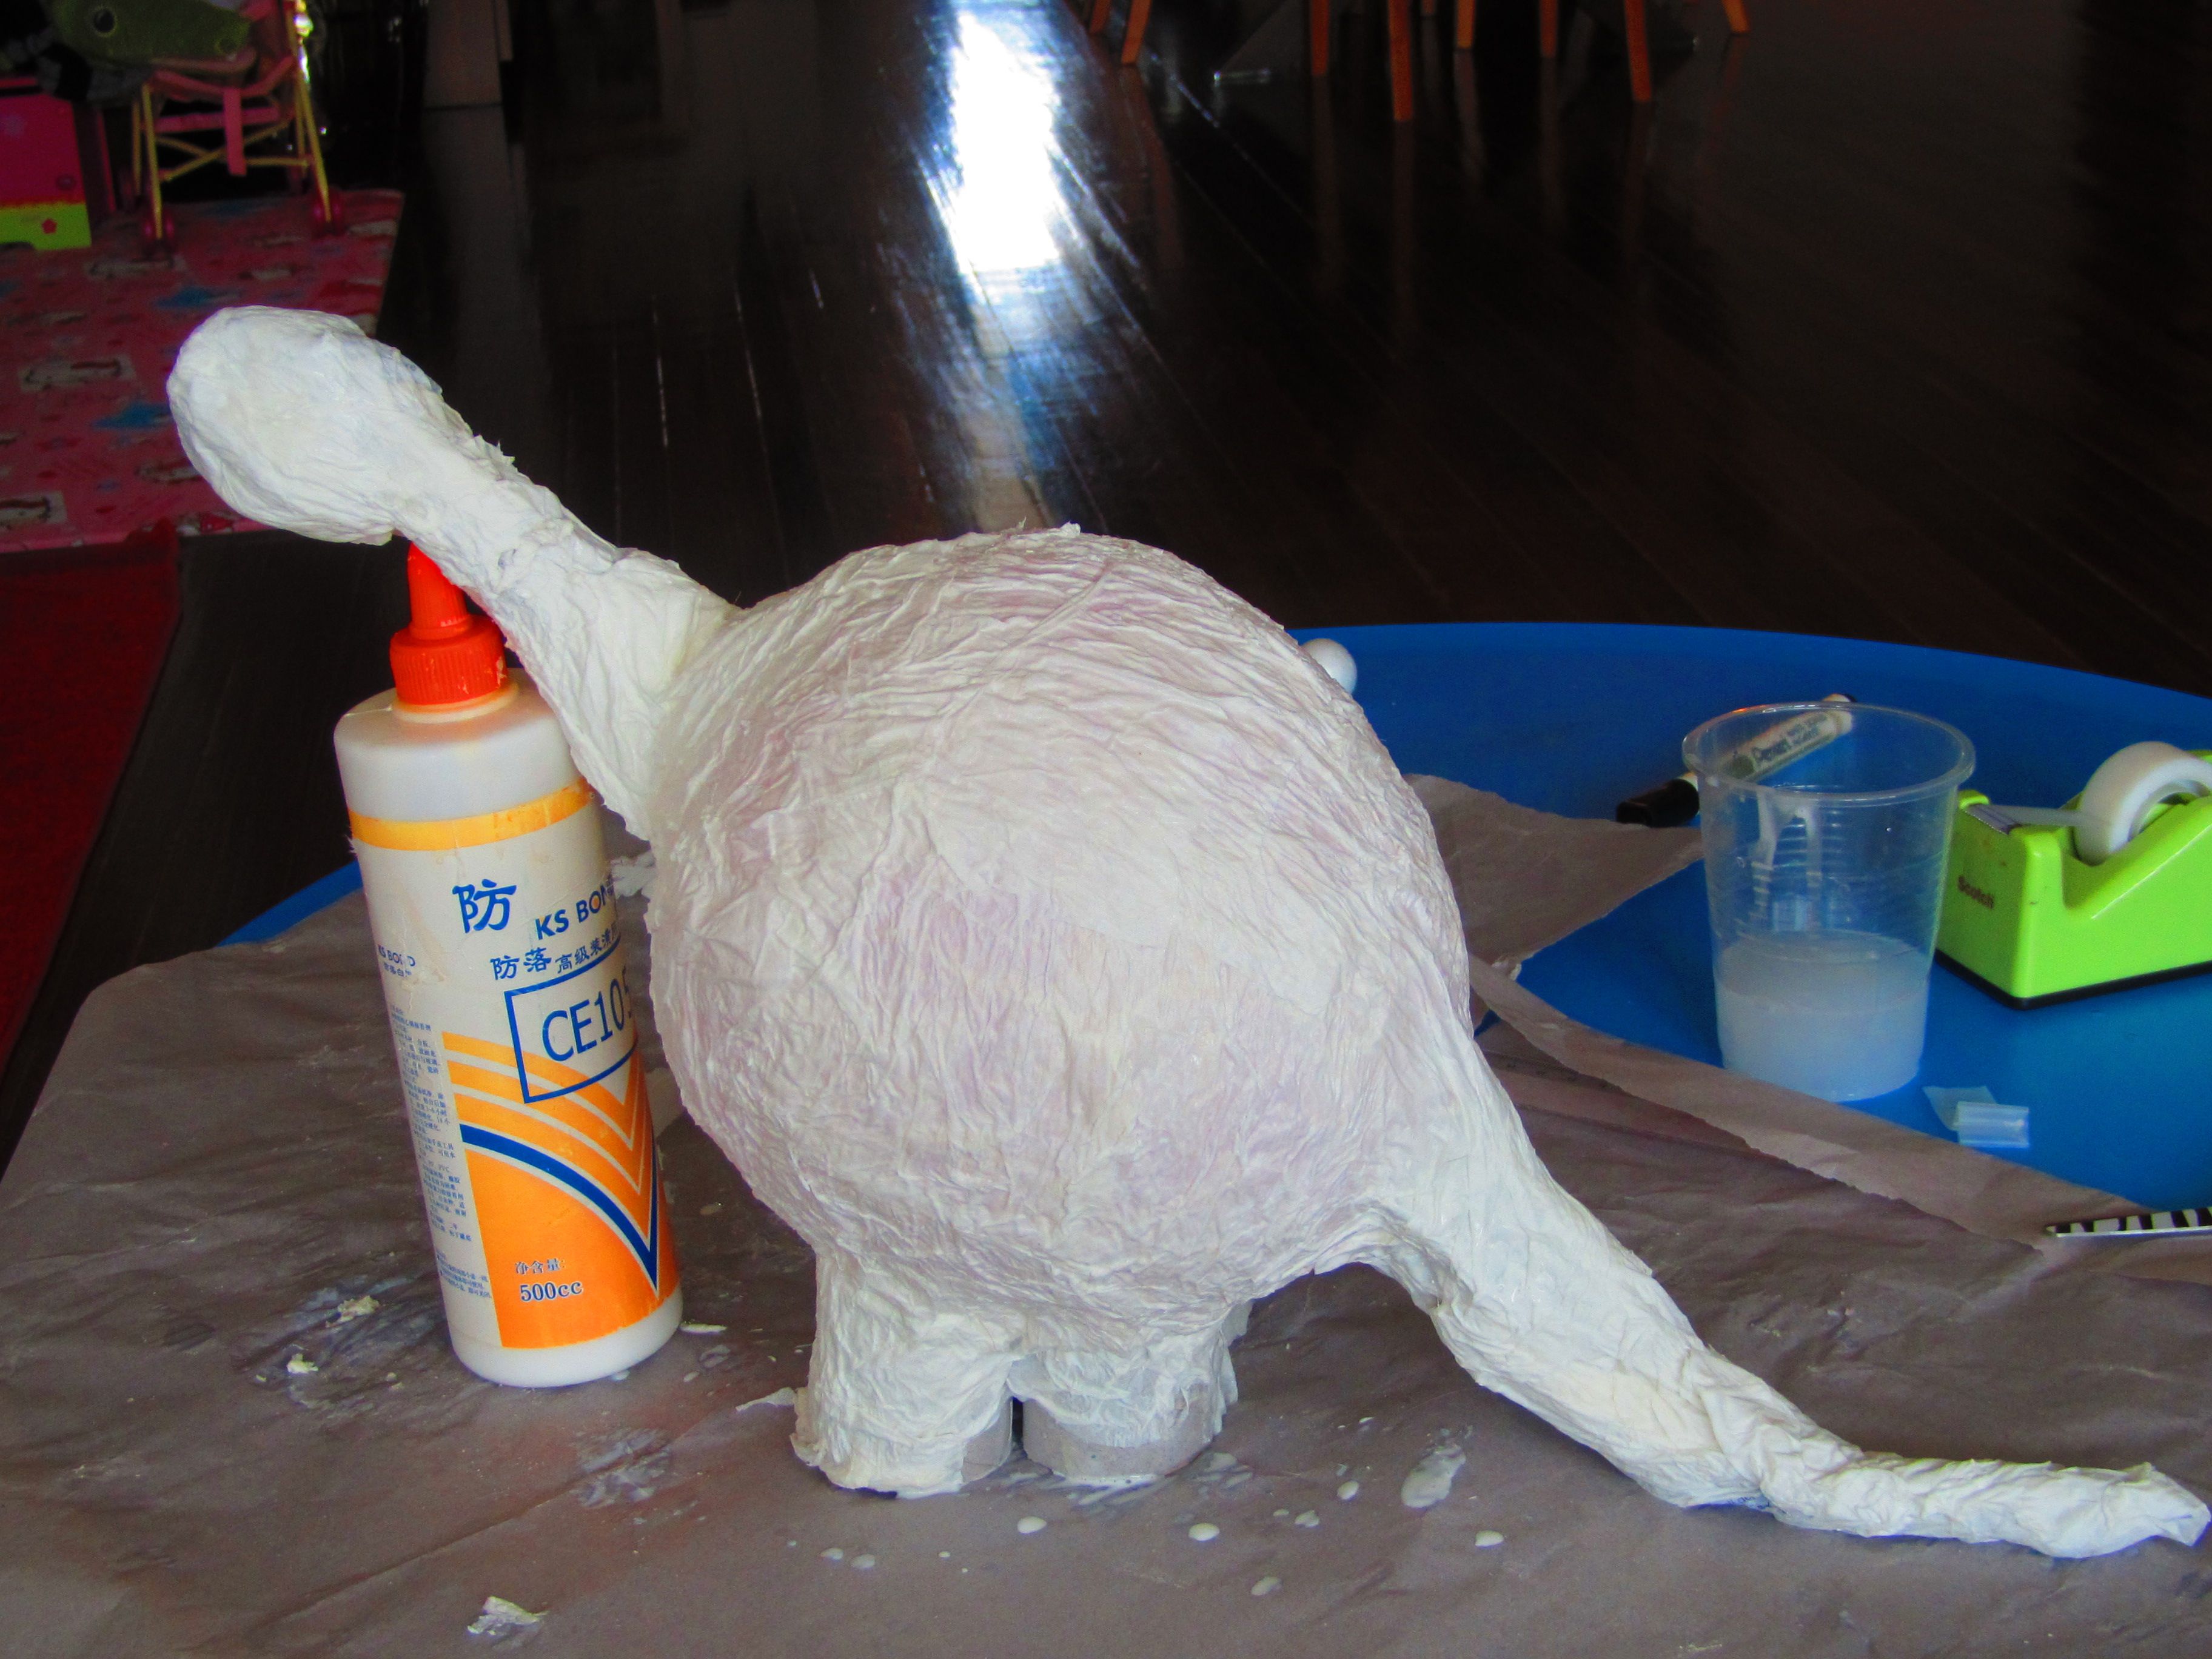 Cover the entire dinosaur with toilet paper and let it dry3648 x ...